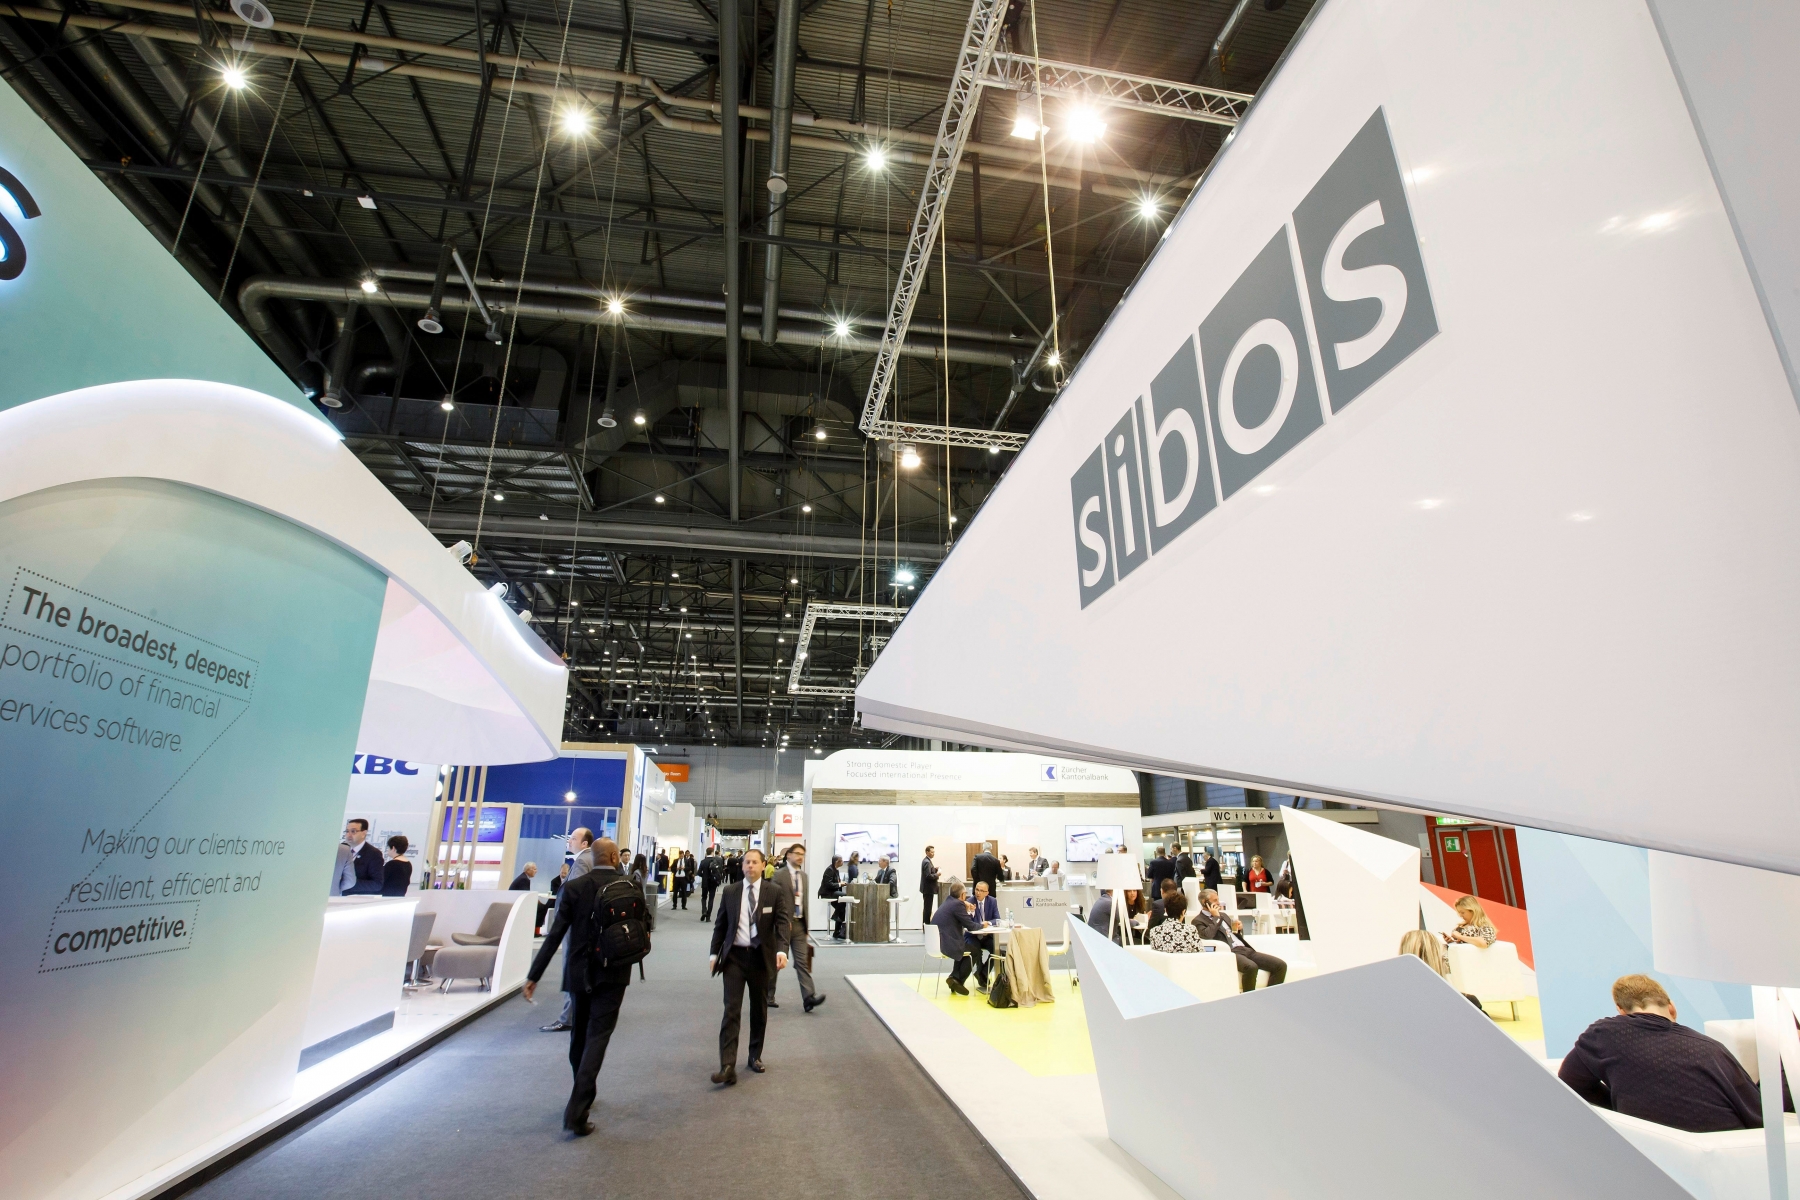 Visitors gather in the hall, during SIBOS 2016 at the Palexpo, in Geneva, Switzerland, Monday, September 26, 2016. SIBOS (Swift International Banking Operations Seminar) is an annual conference, exhibition and networking event organized by SWIFT for the financial industry. The 38th edition is held for the first time in Geneva and for the third time in Switzerland from the 26th to 29th September 2016. (KEYSTONE/Salvatore Di Nolfi) SWITZERLAND SIBOS FINANCIAL CONFERENCE